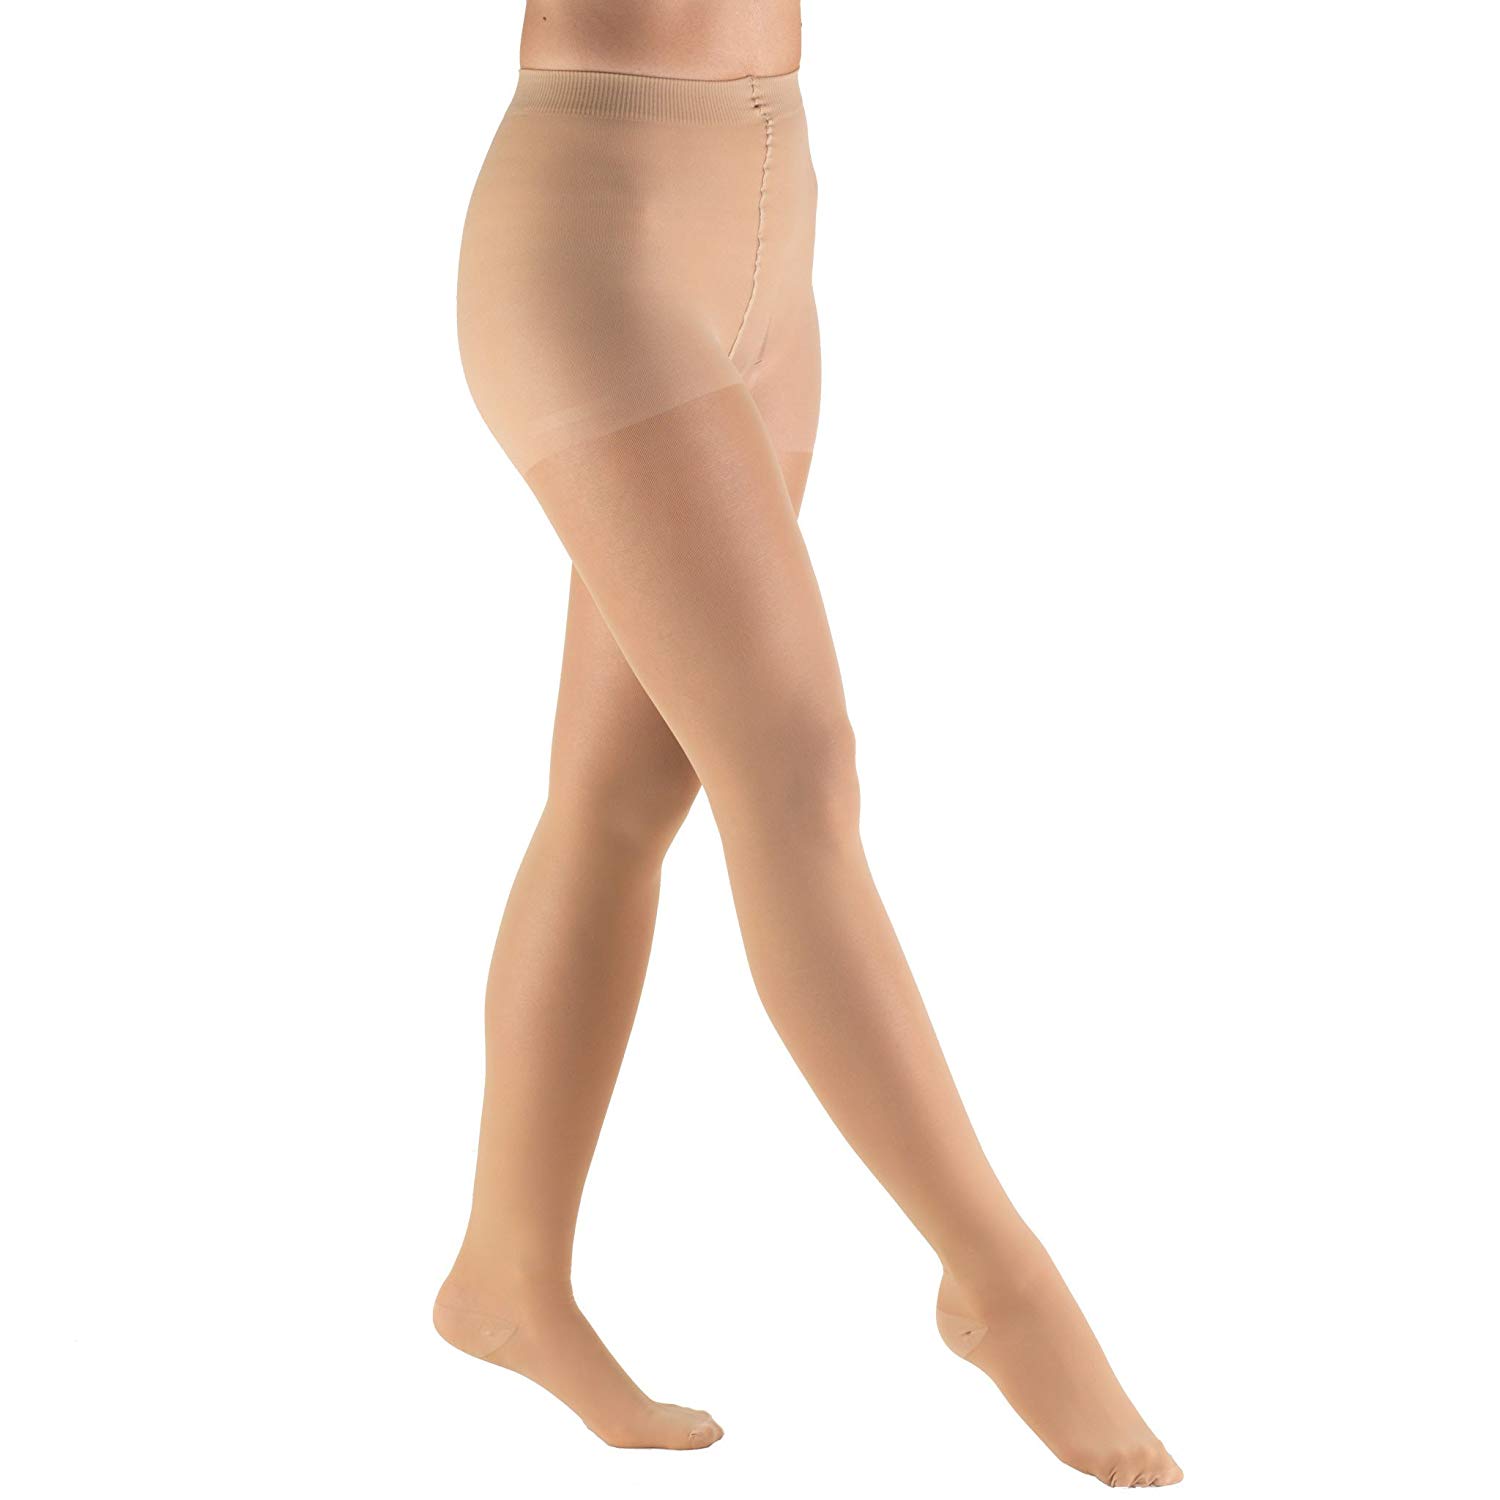 What is the difference between compression pantyhose and regular tights? 3